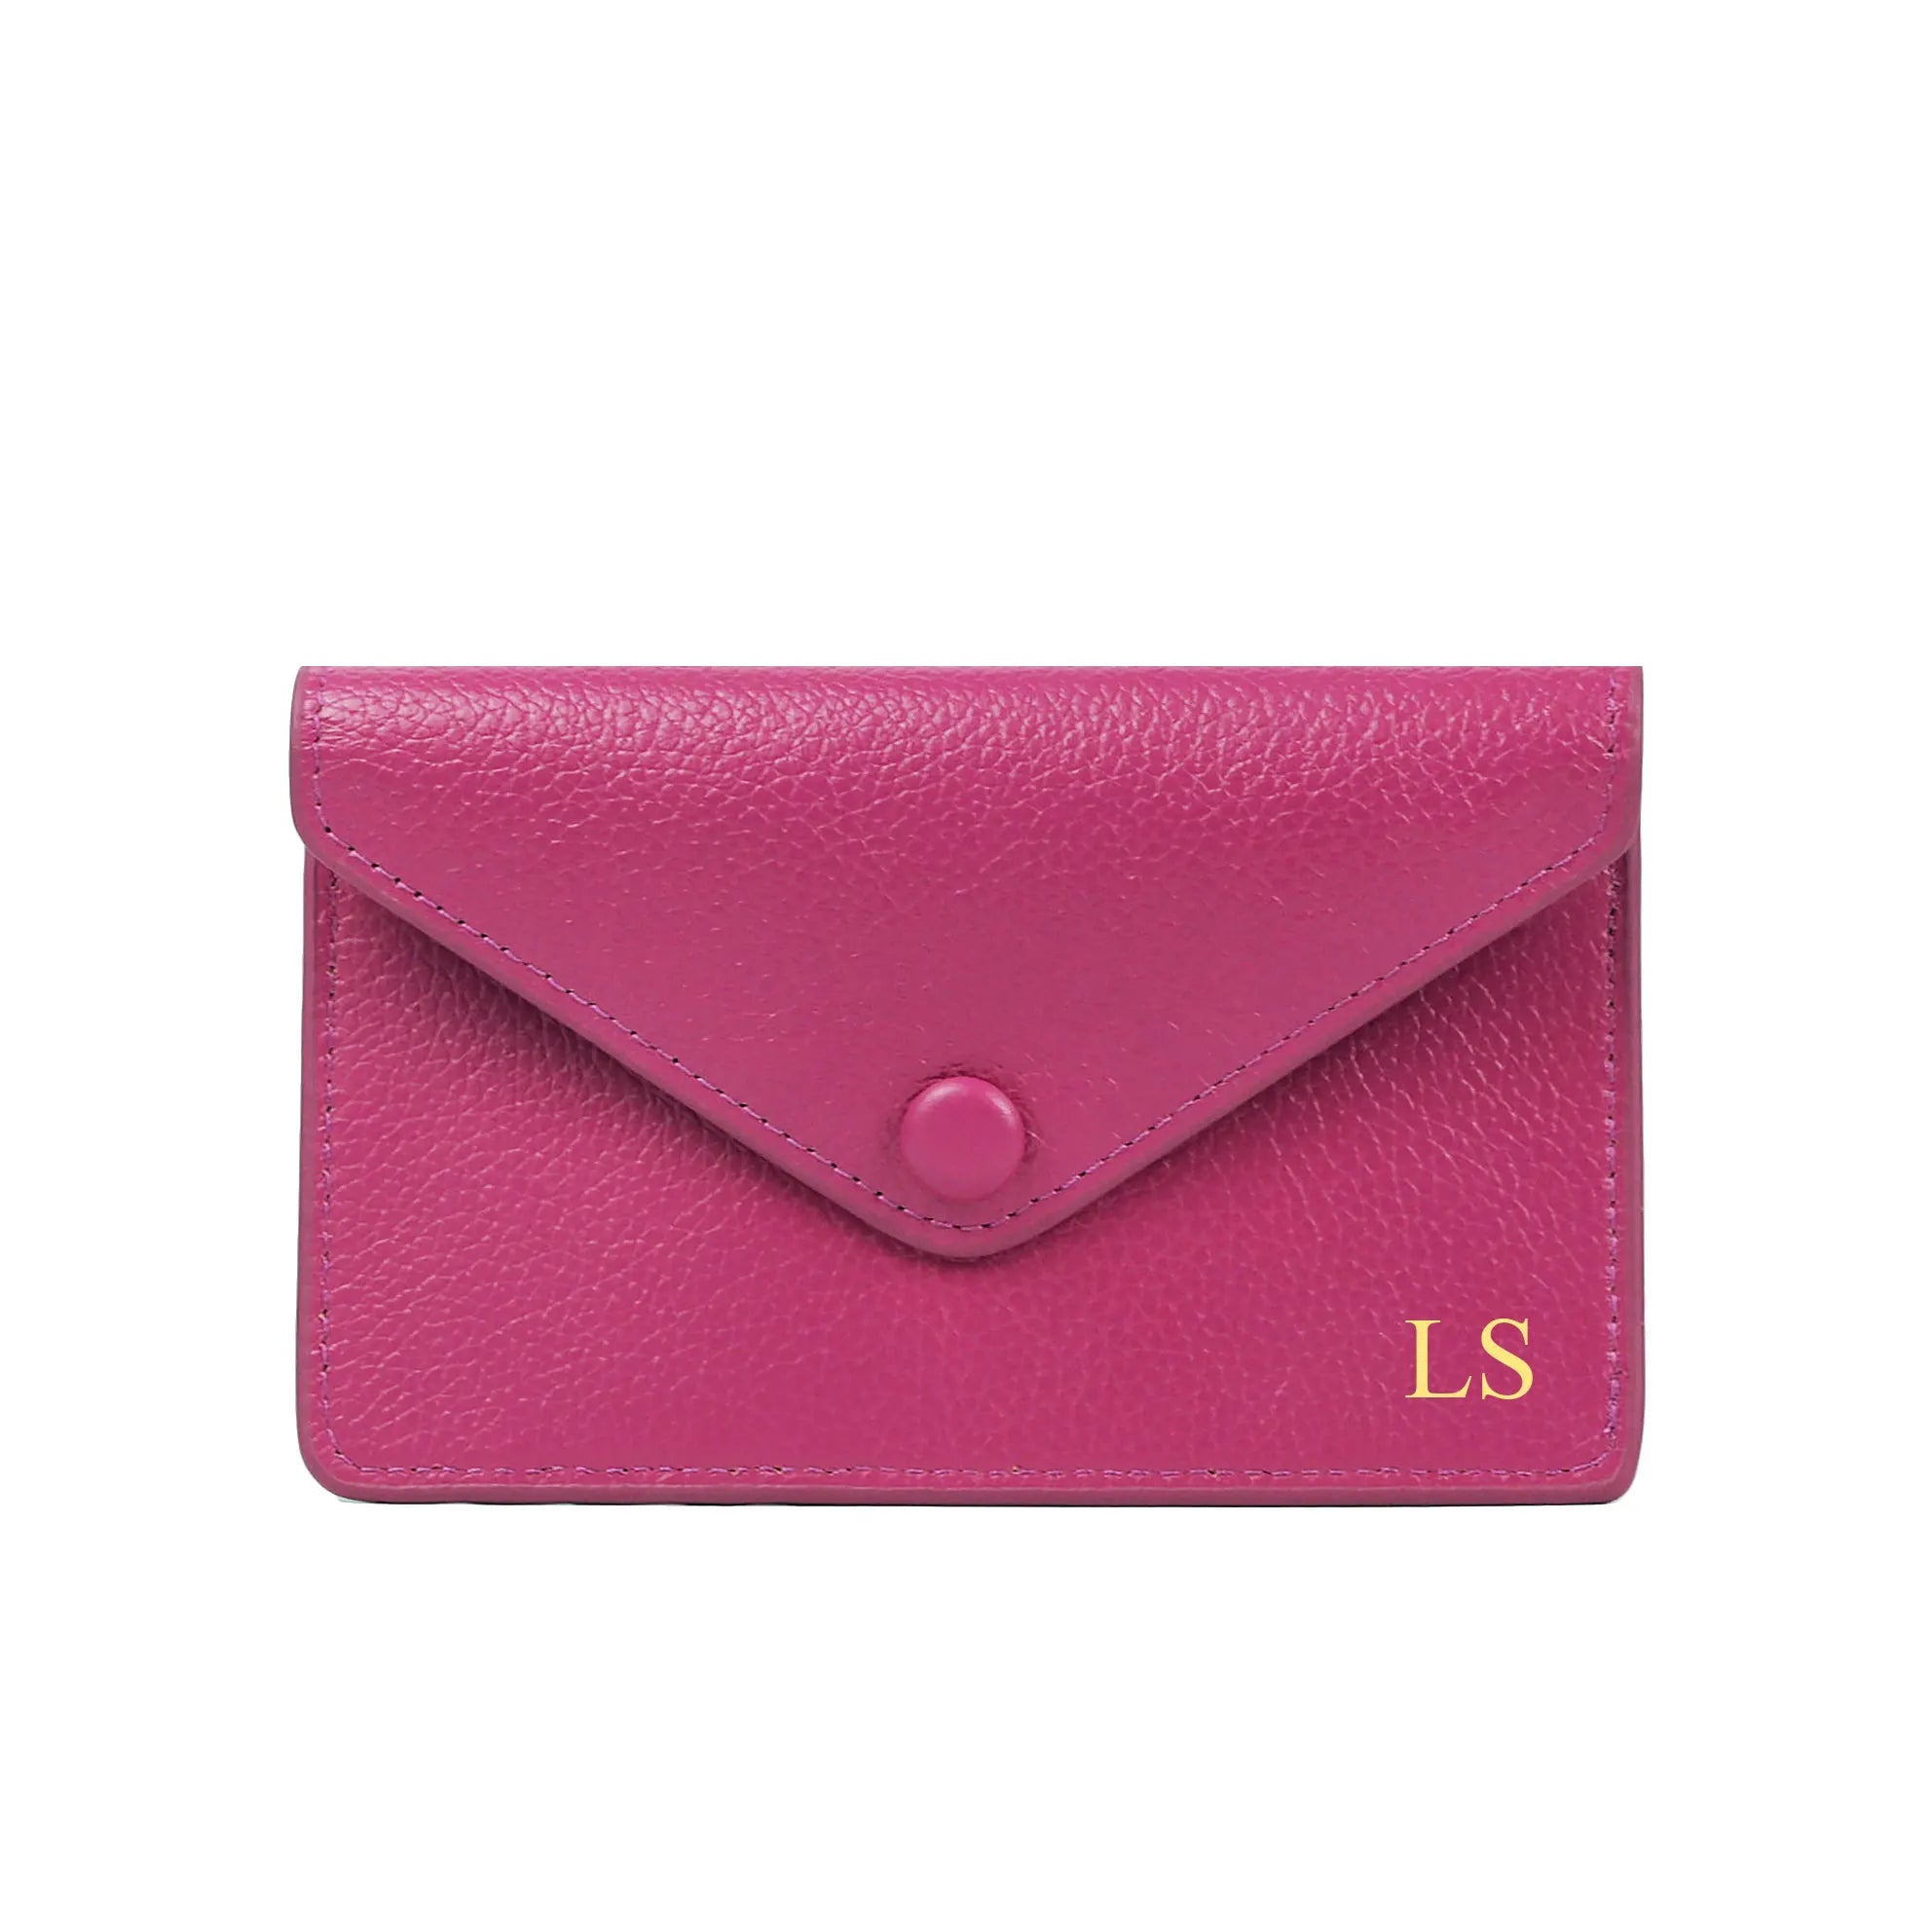 Personalized Monogram Leather Snap Style Wallet